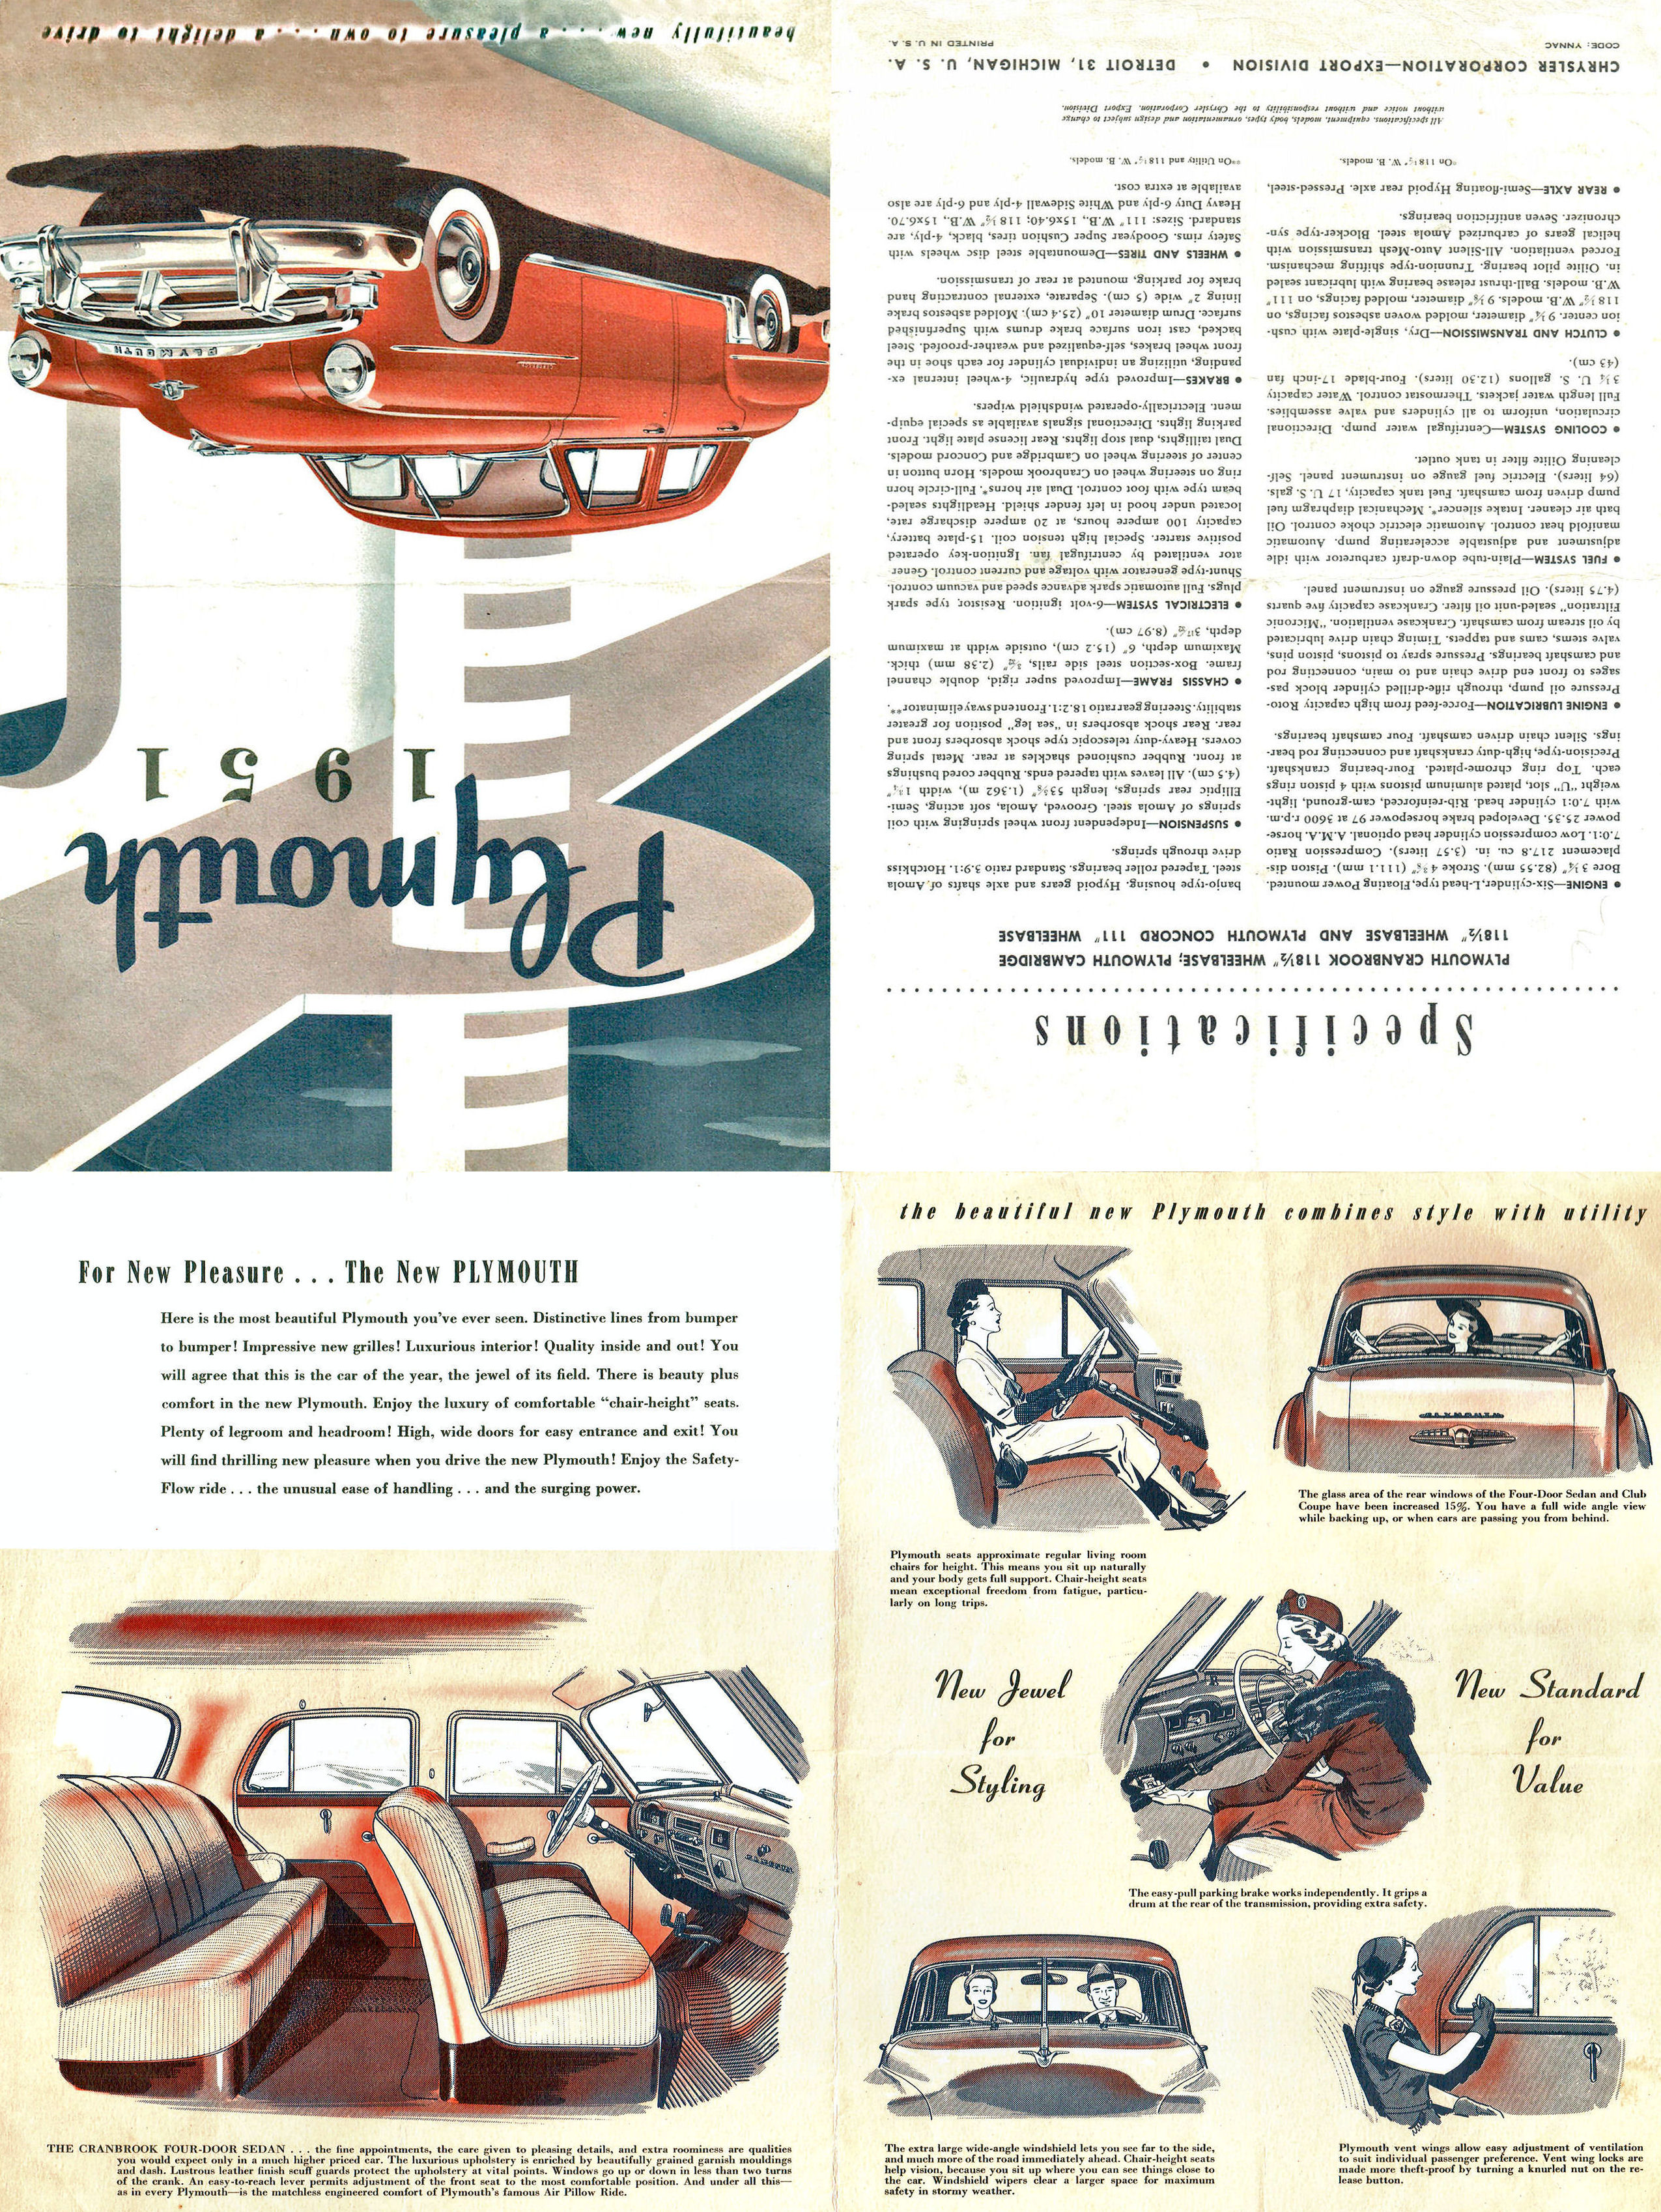 1951 Plymouth Export Foldout (TP).pdf-2023-12-3 20.12.16_Page_3